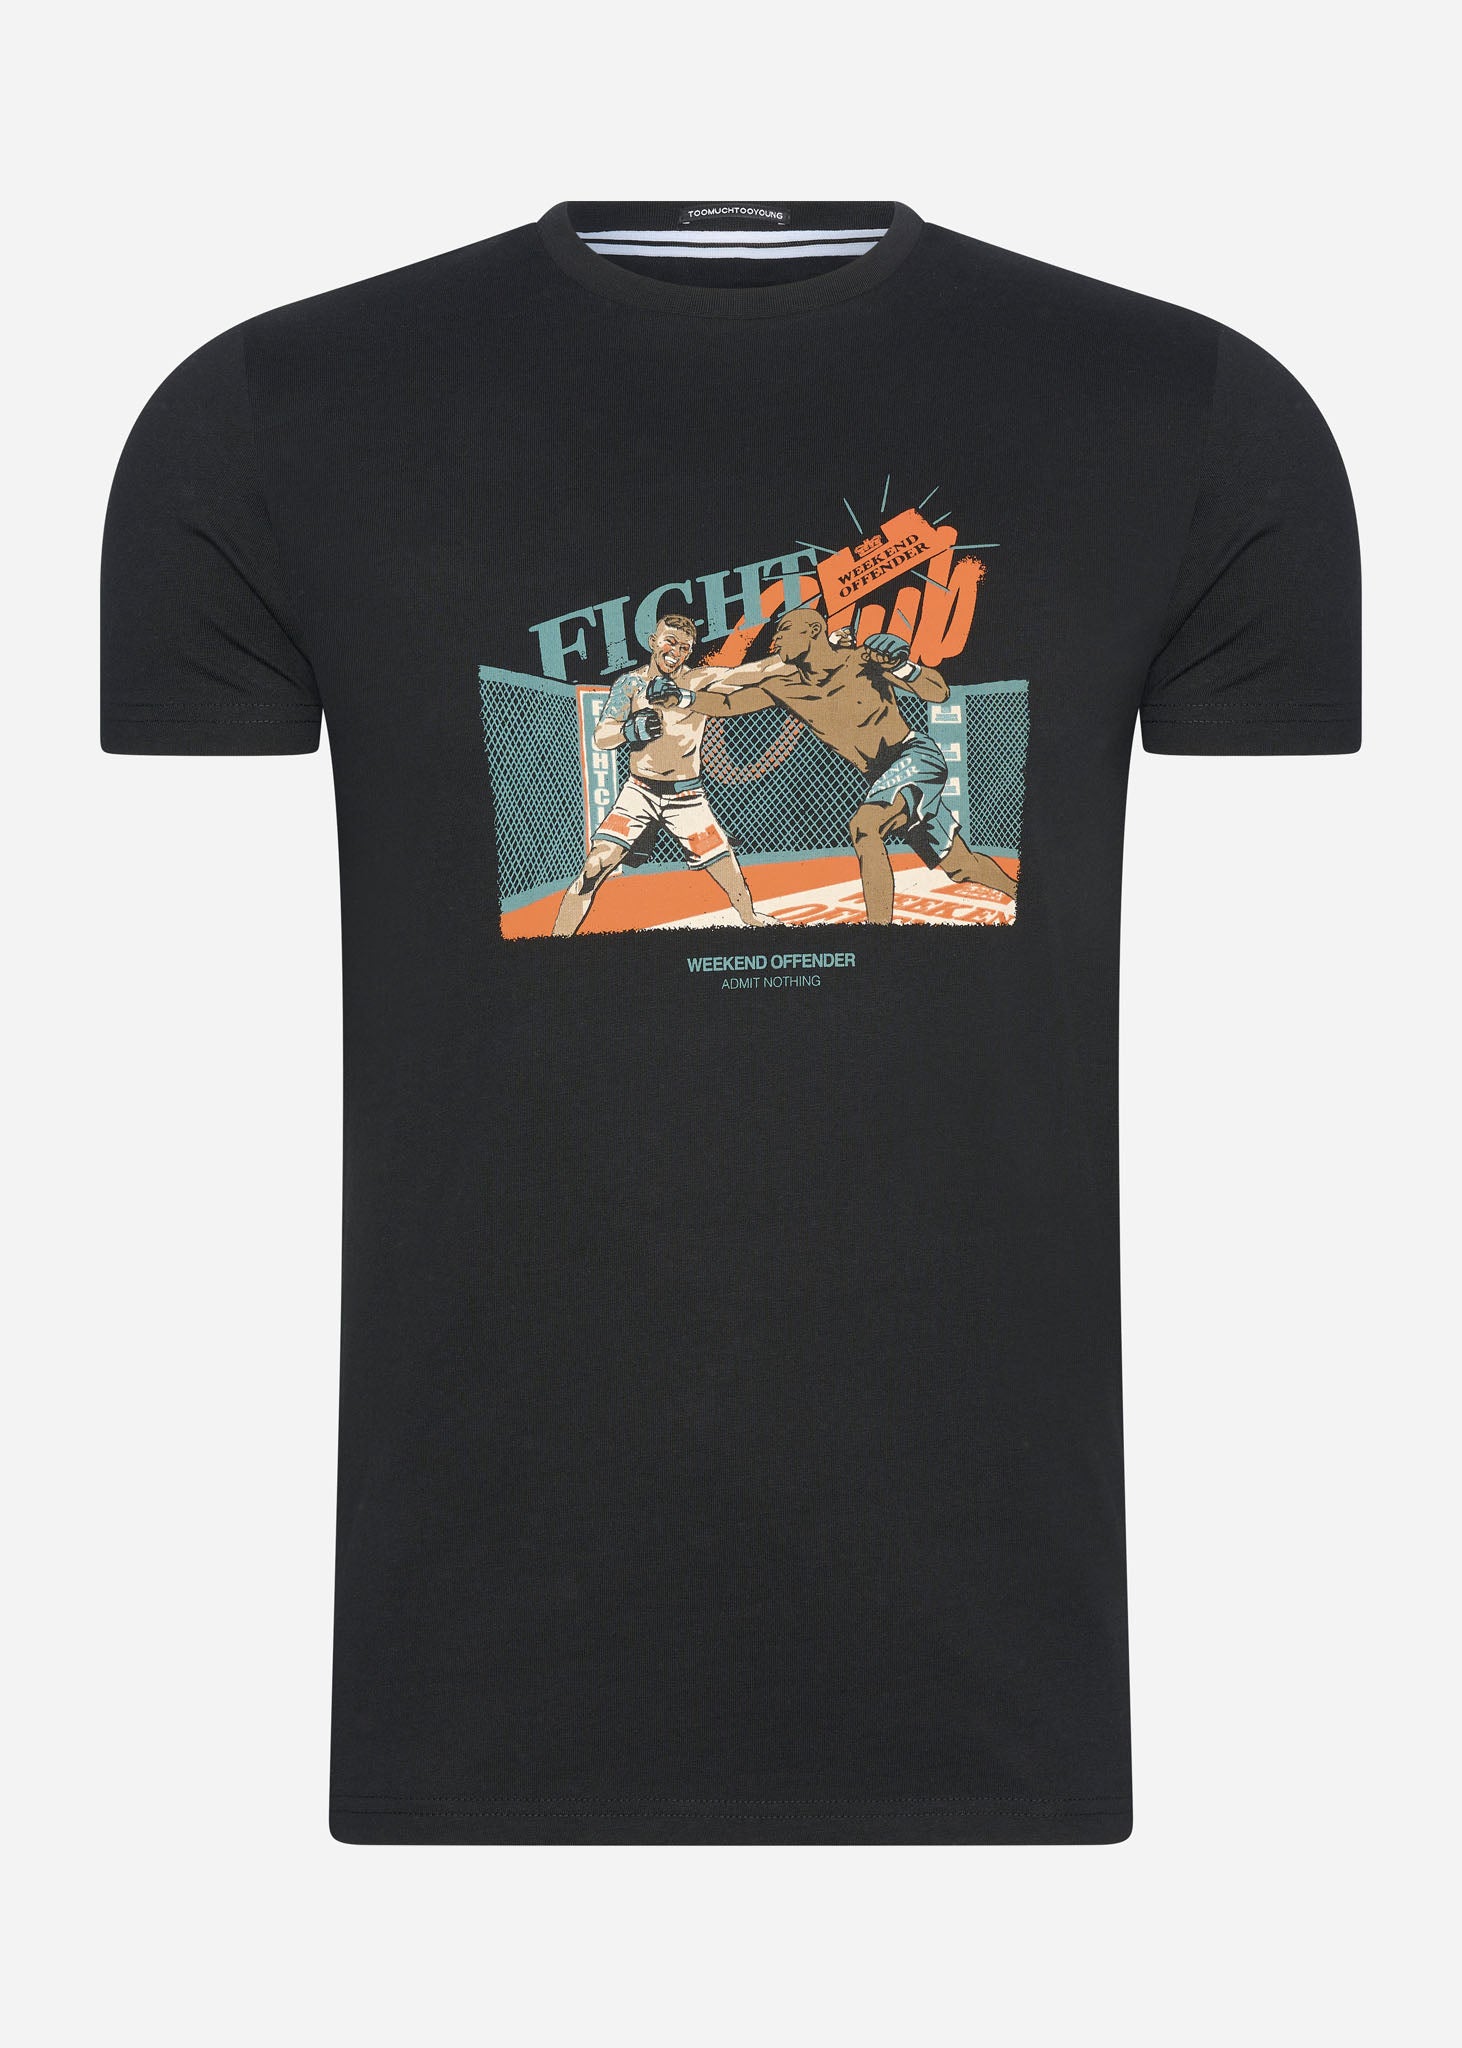 Weekend Offender T-shirts  Fight club - black 